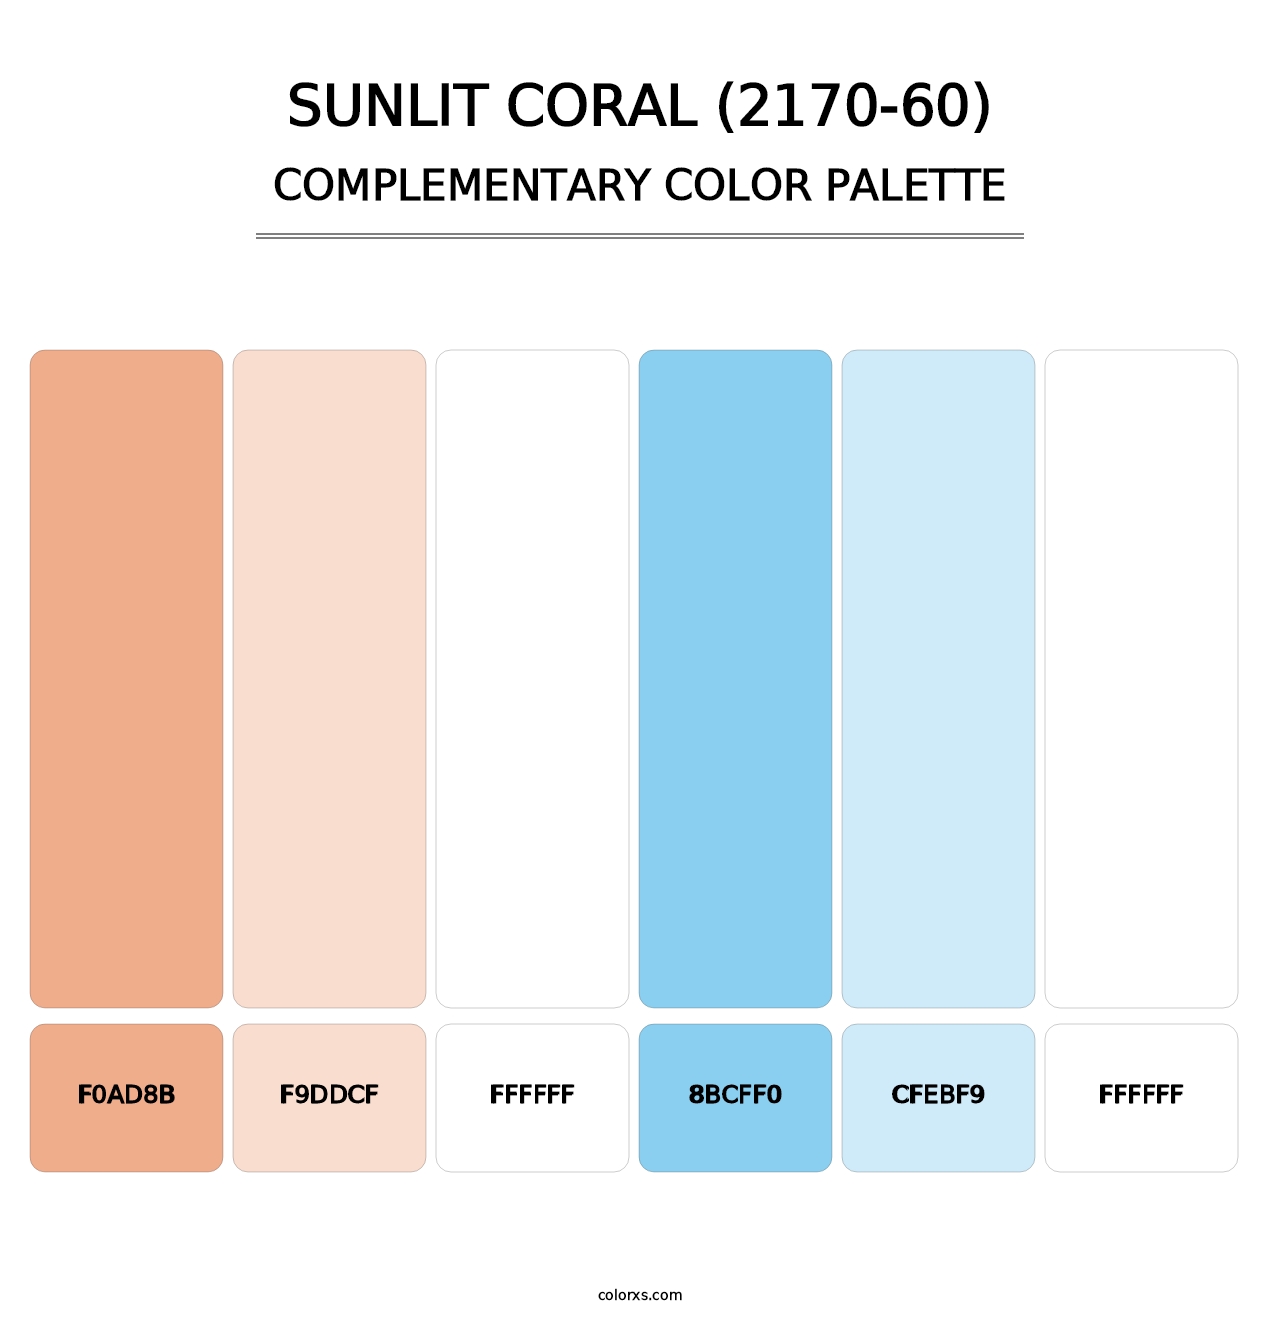 Sunlit Coral (2170-60) - Complementary Color Palette